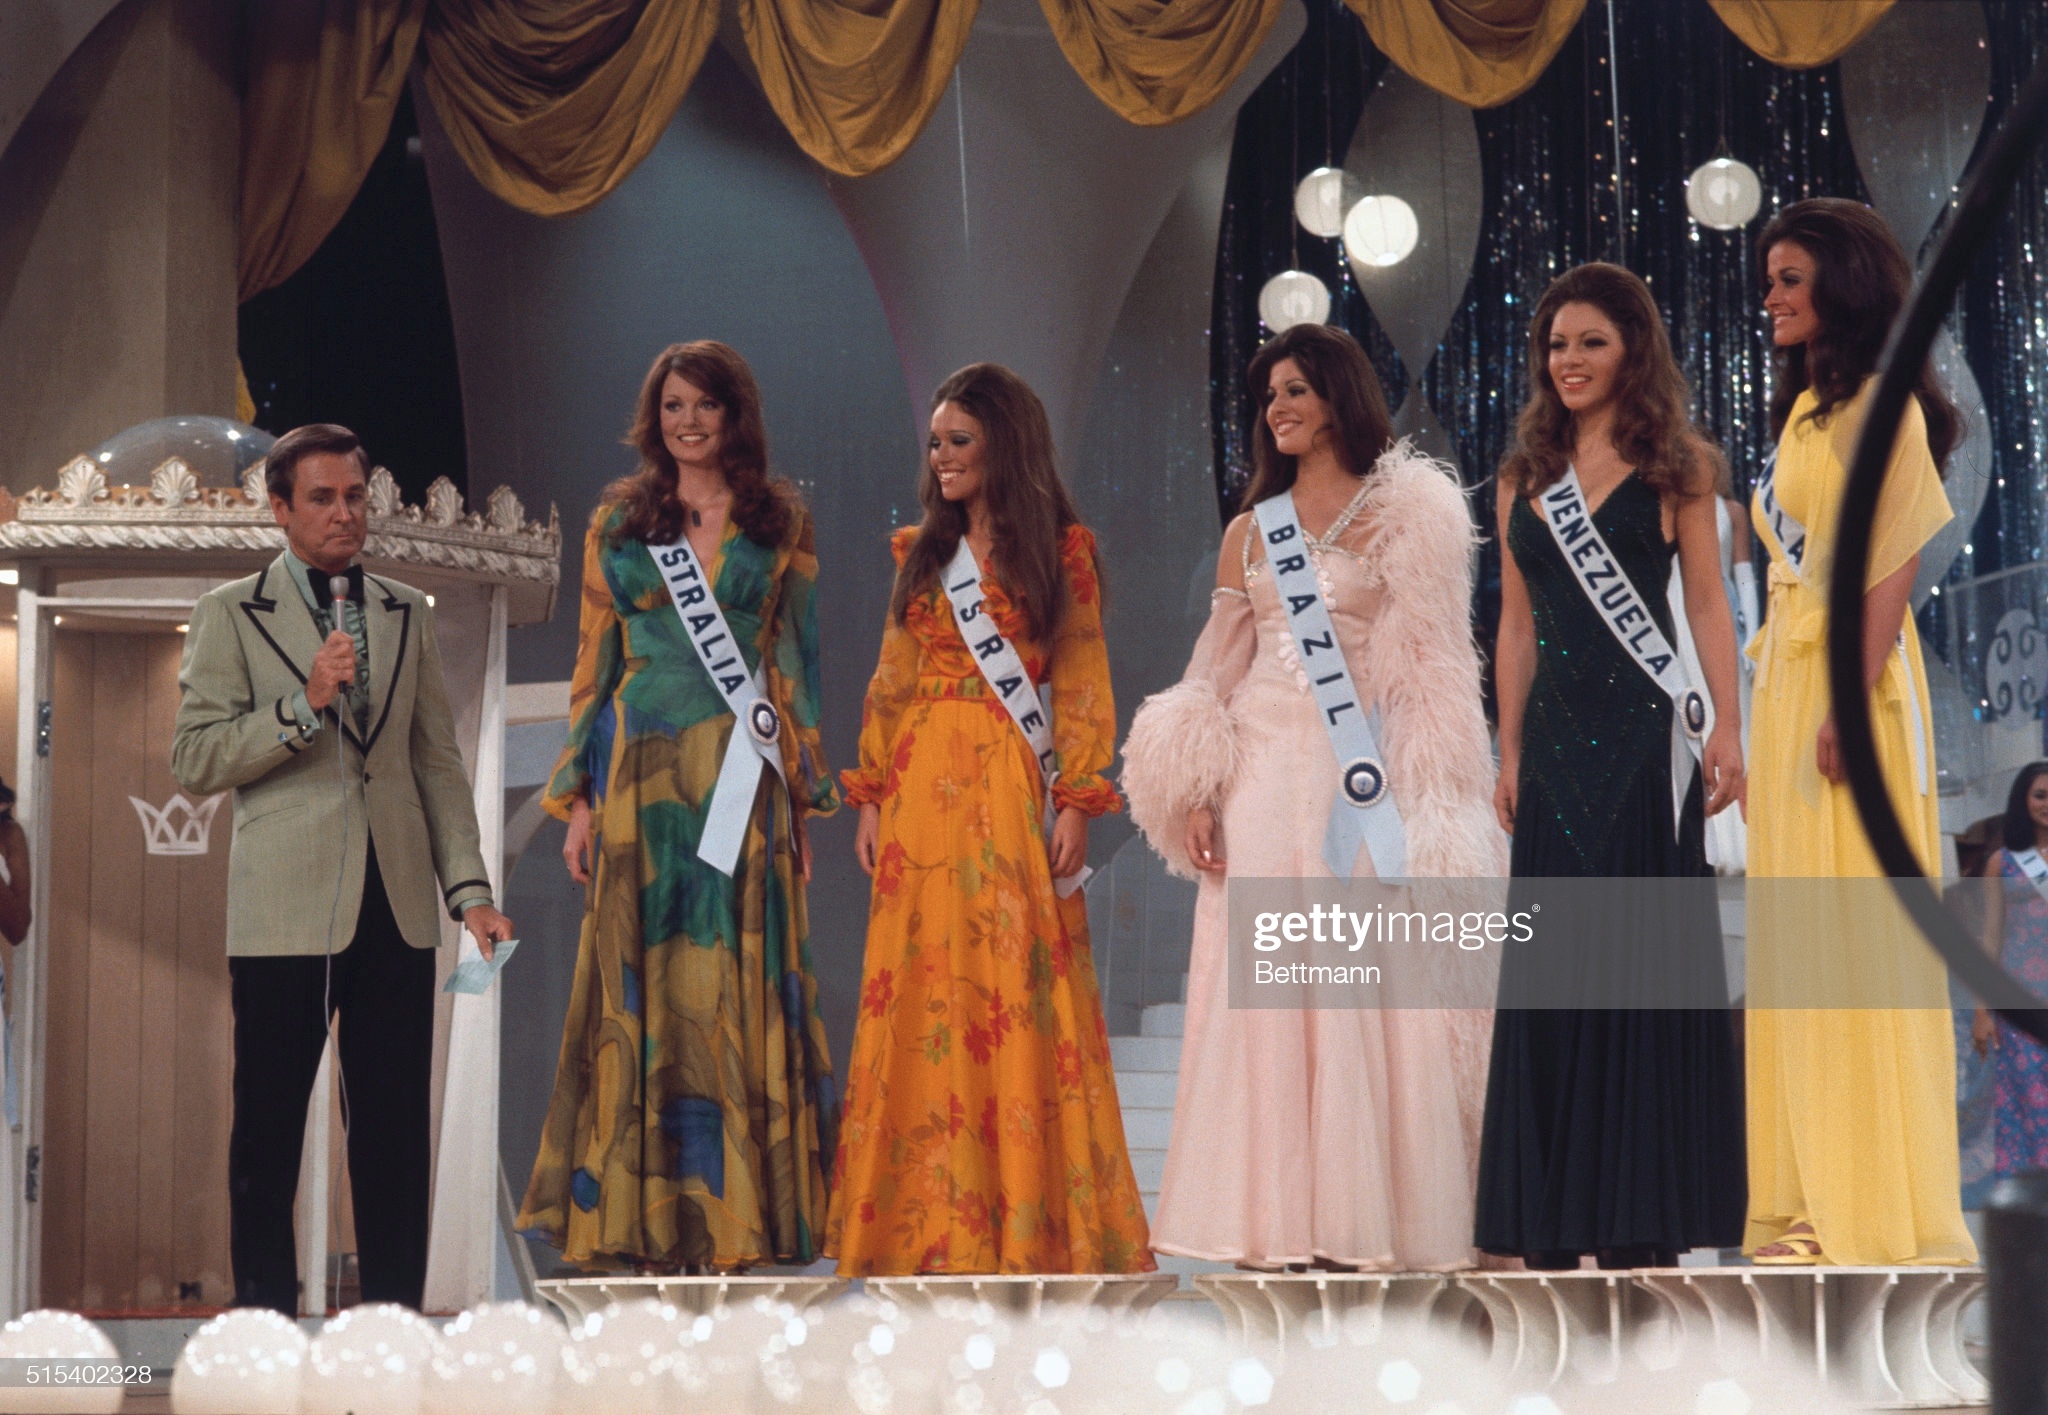 kerry anne wells, miss universe 1972. 25792914